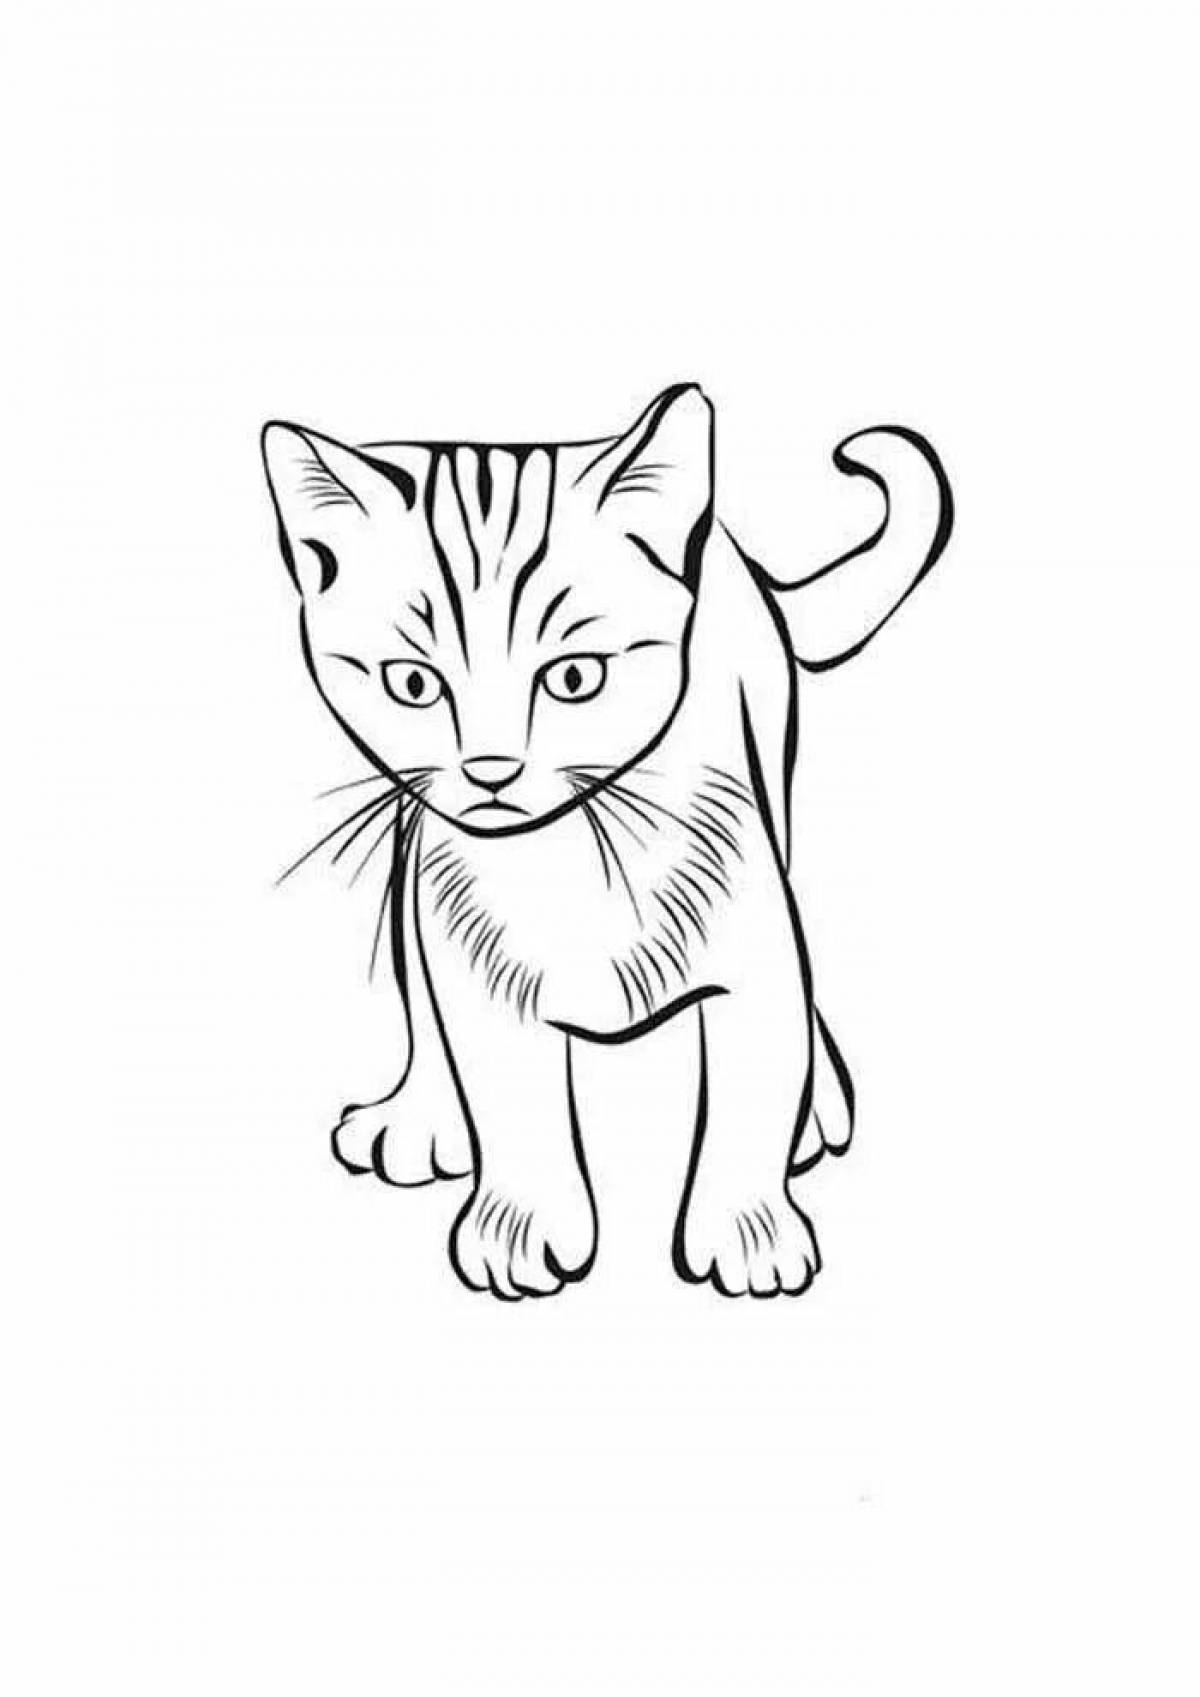 Cheerful cat glitter coloring book